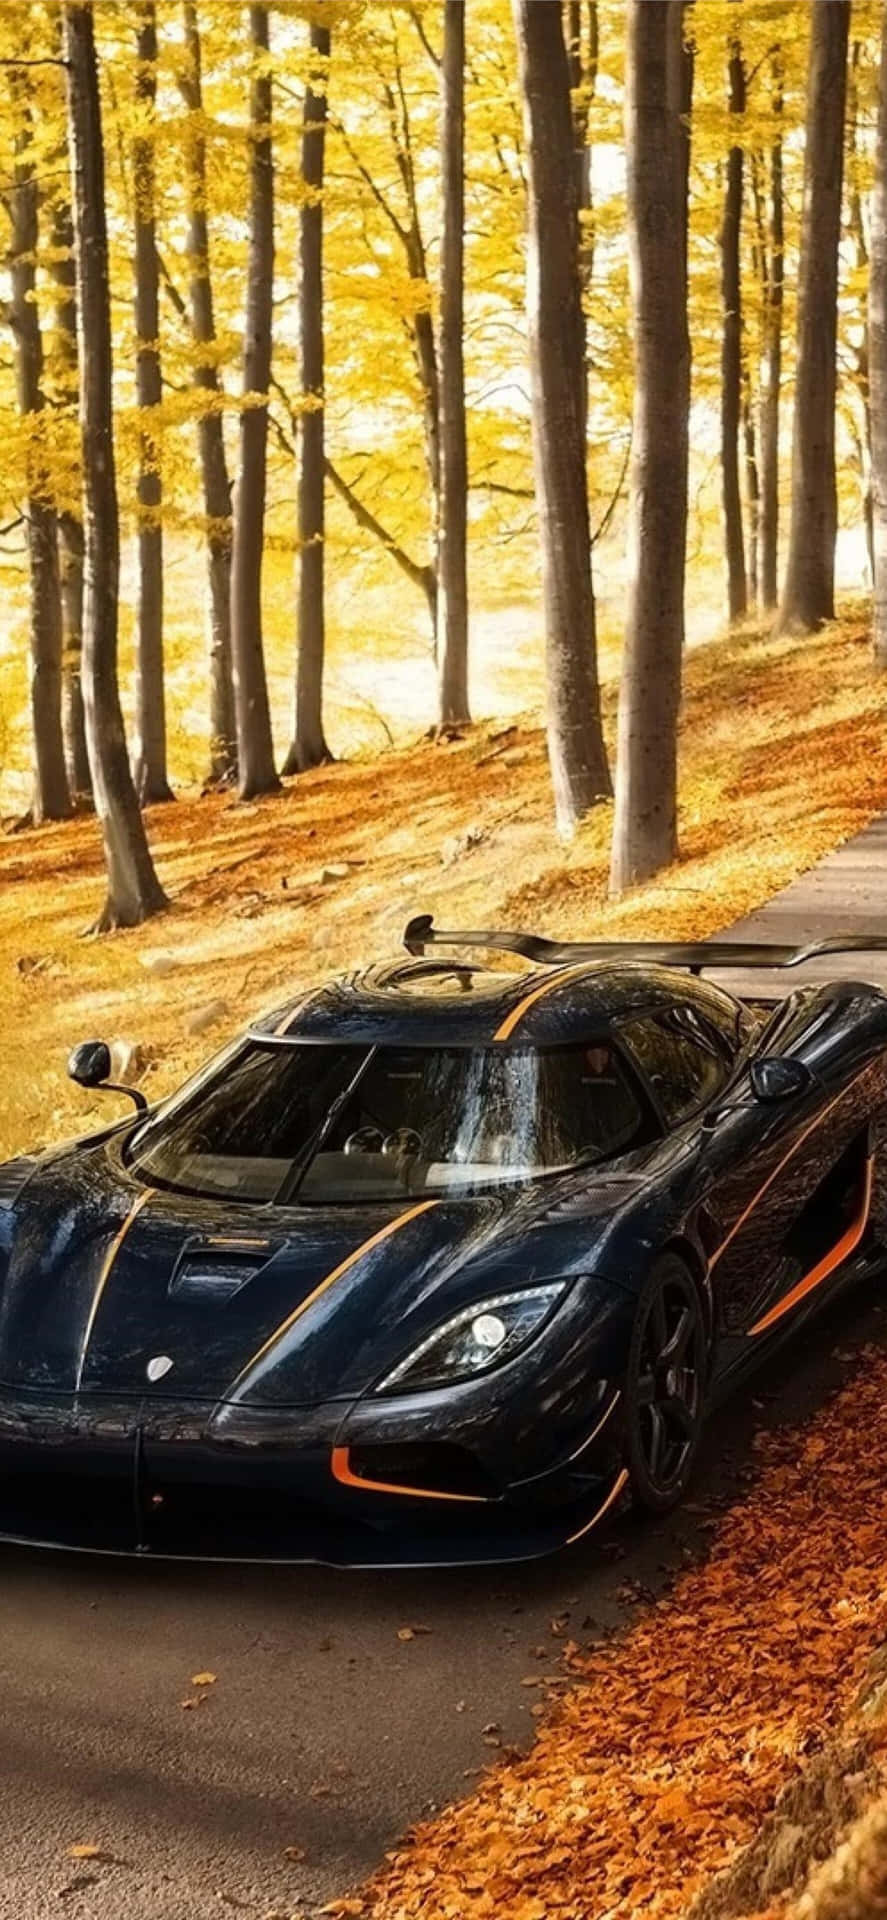 A Black Sports Car Is Parked In The Woods Wallpaper